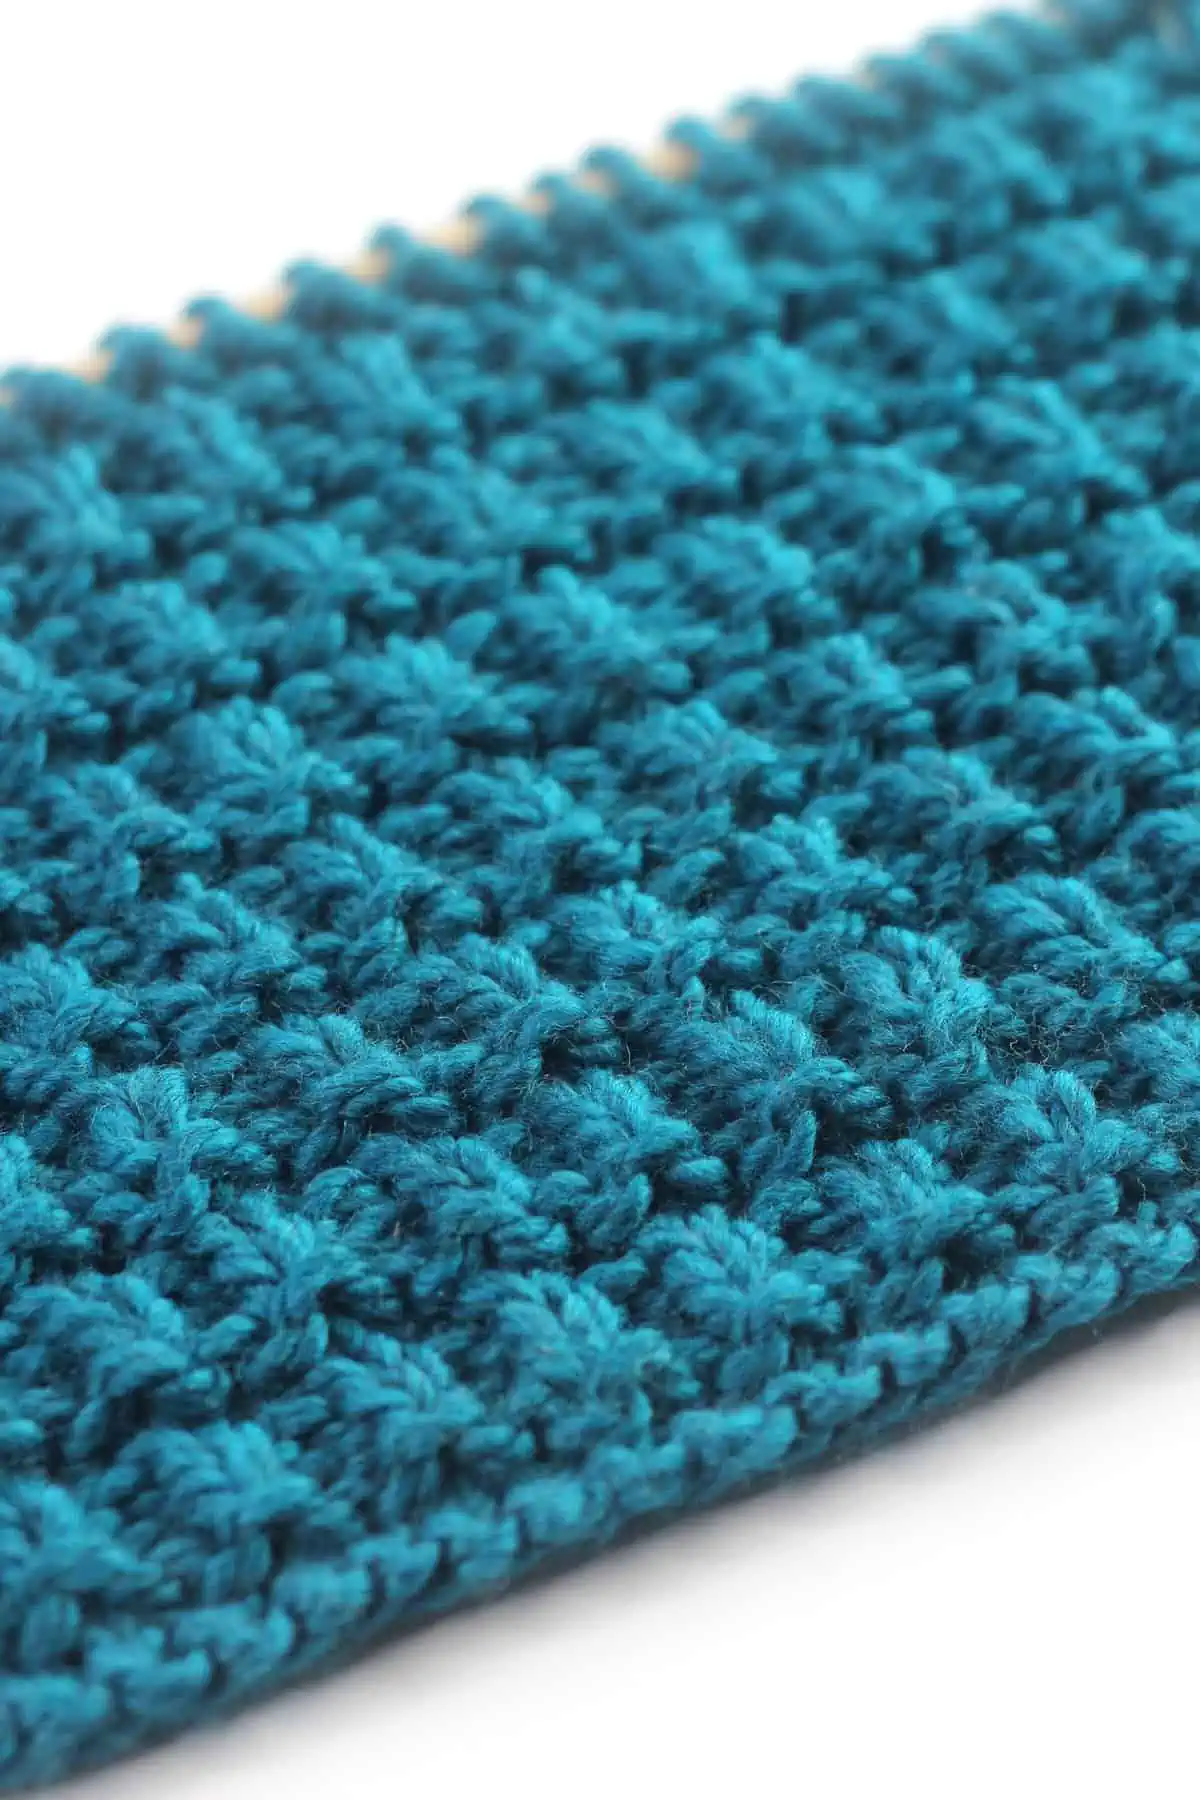 Close-up of Hurdle stitch texture knitted with blue colored yarn.